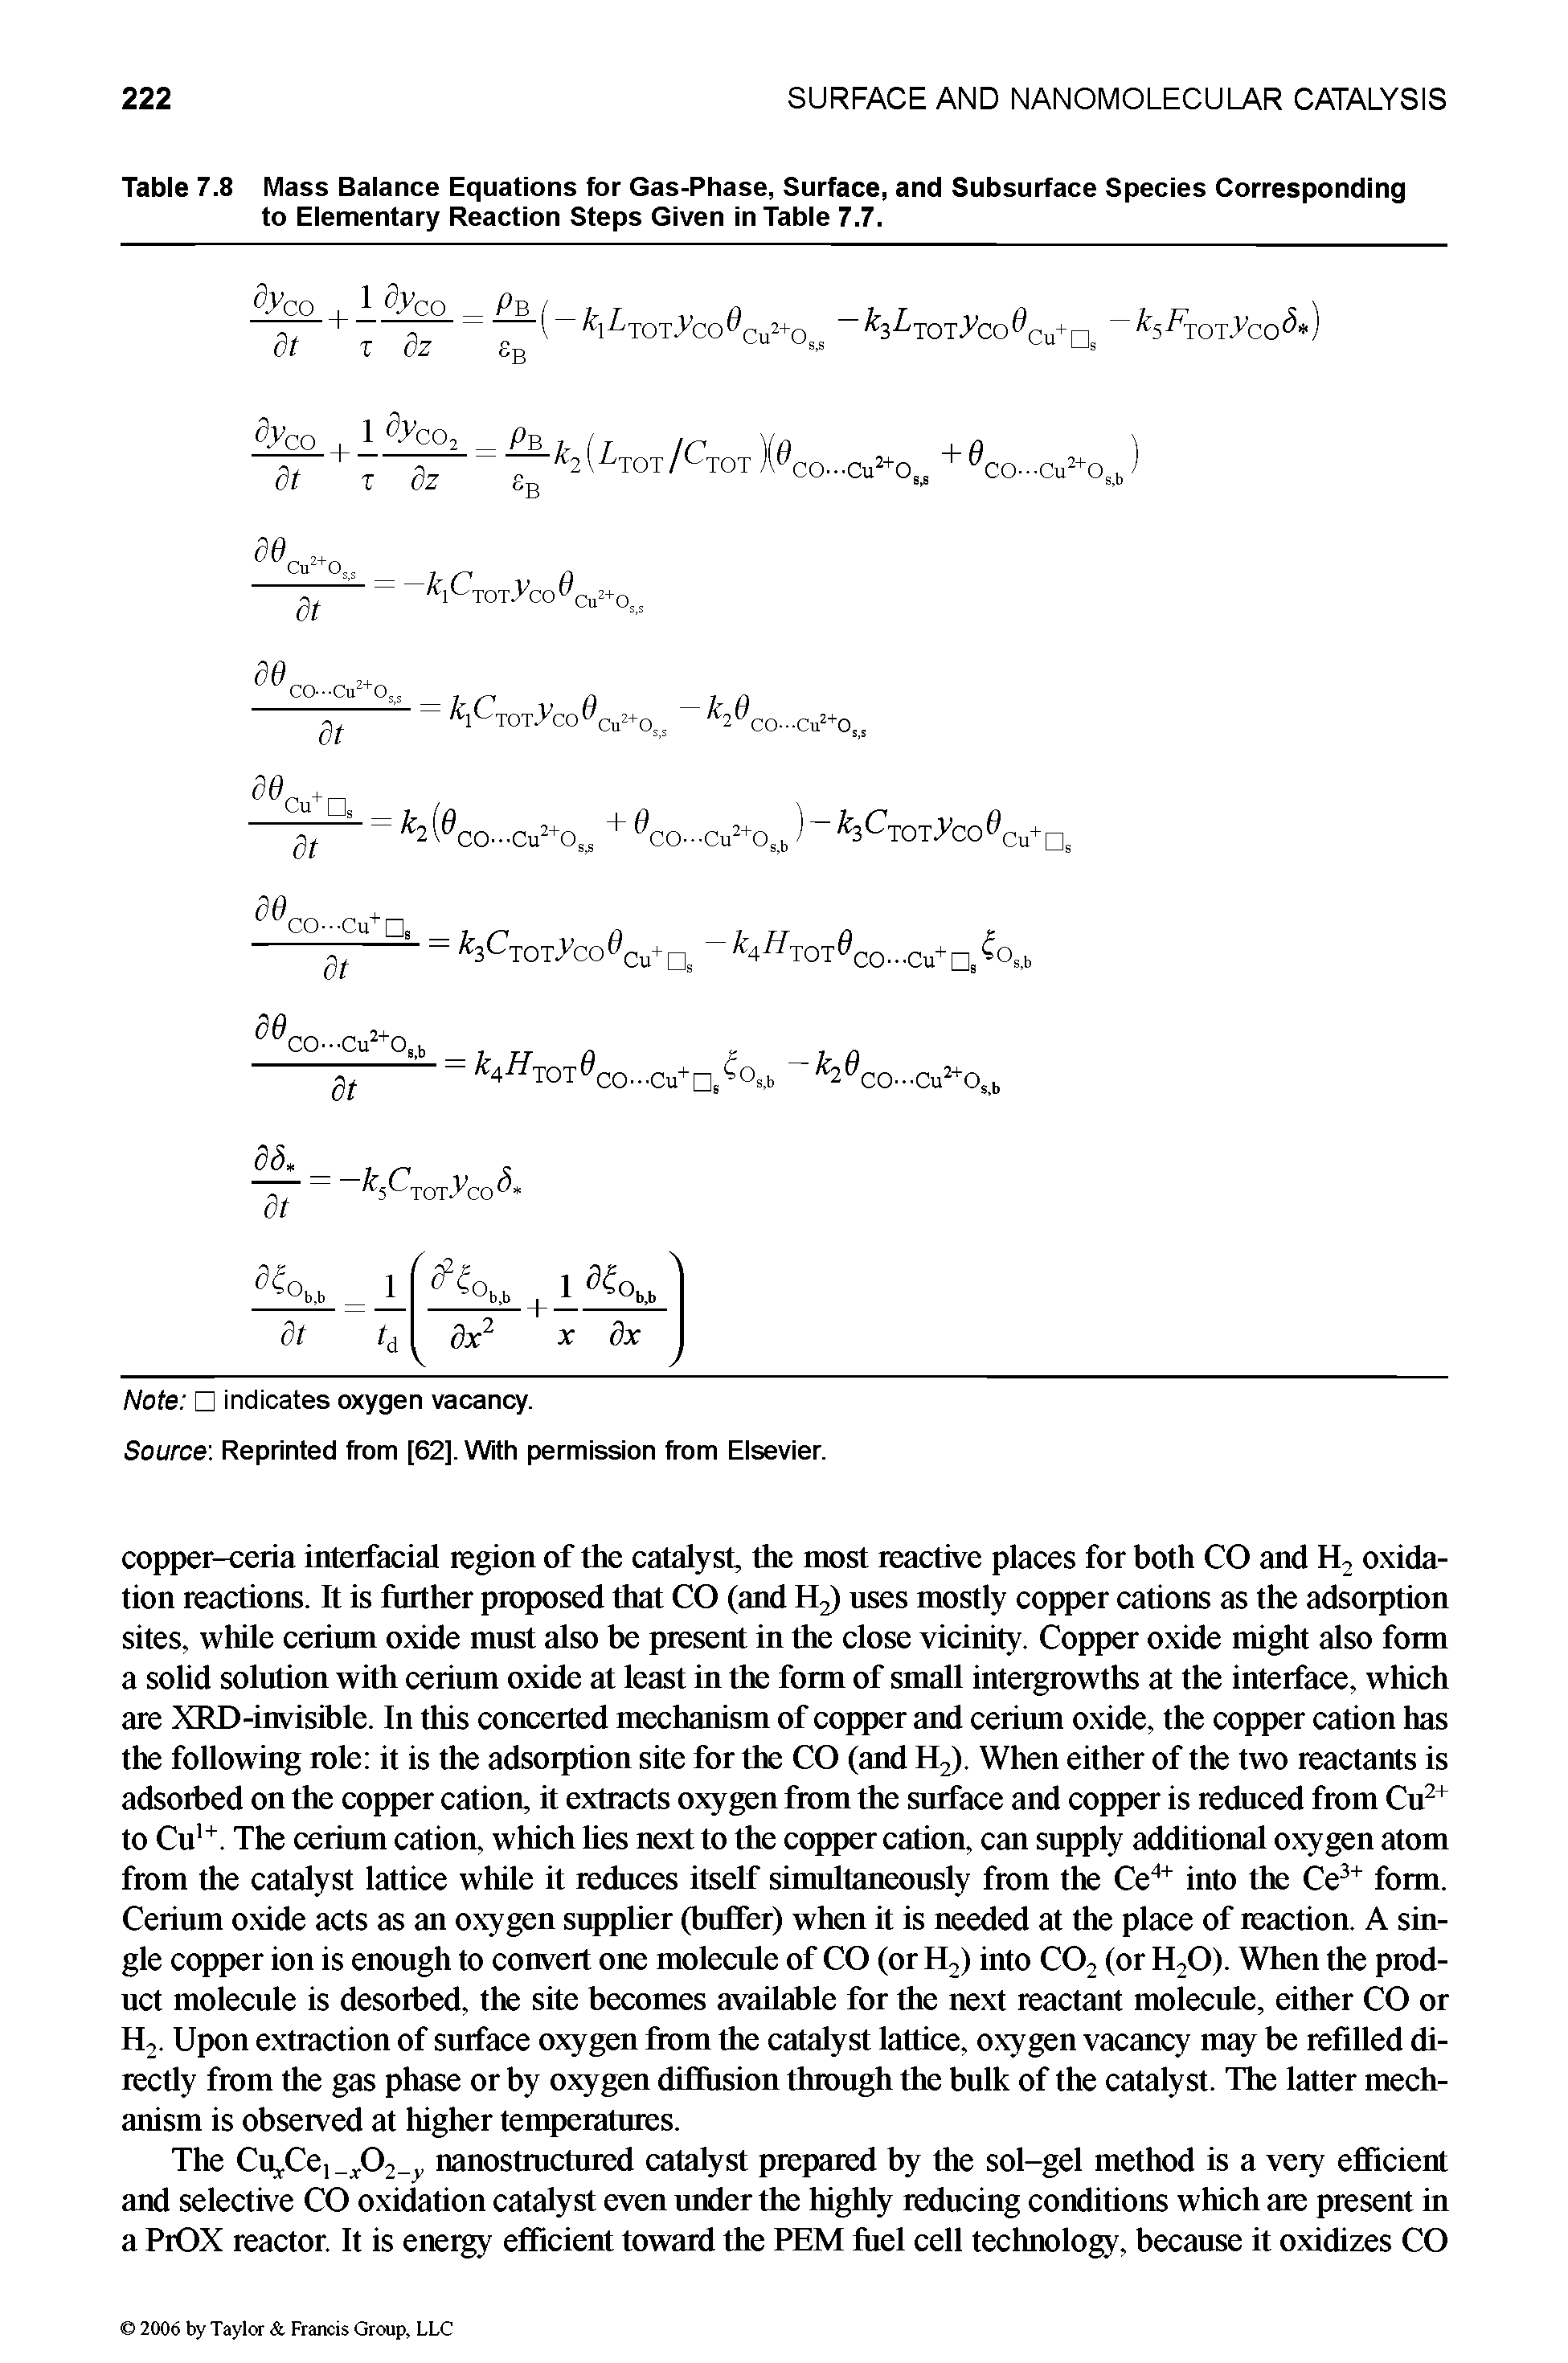 Table 7.8 Mass Balance Equations for Gas-Phase, Surface, and Subsurface Species Corresponding to Elementary Reaction Steps Given in Table 7.7.